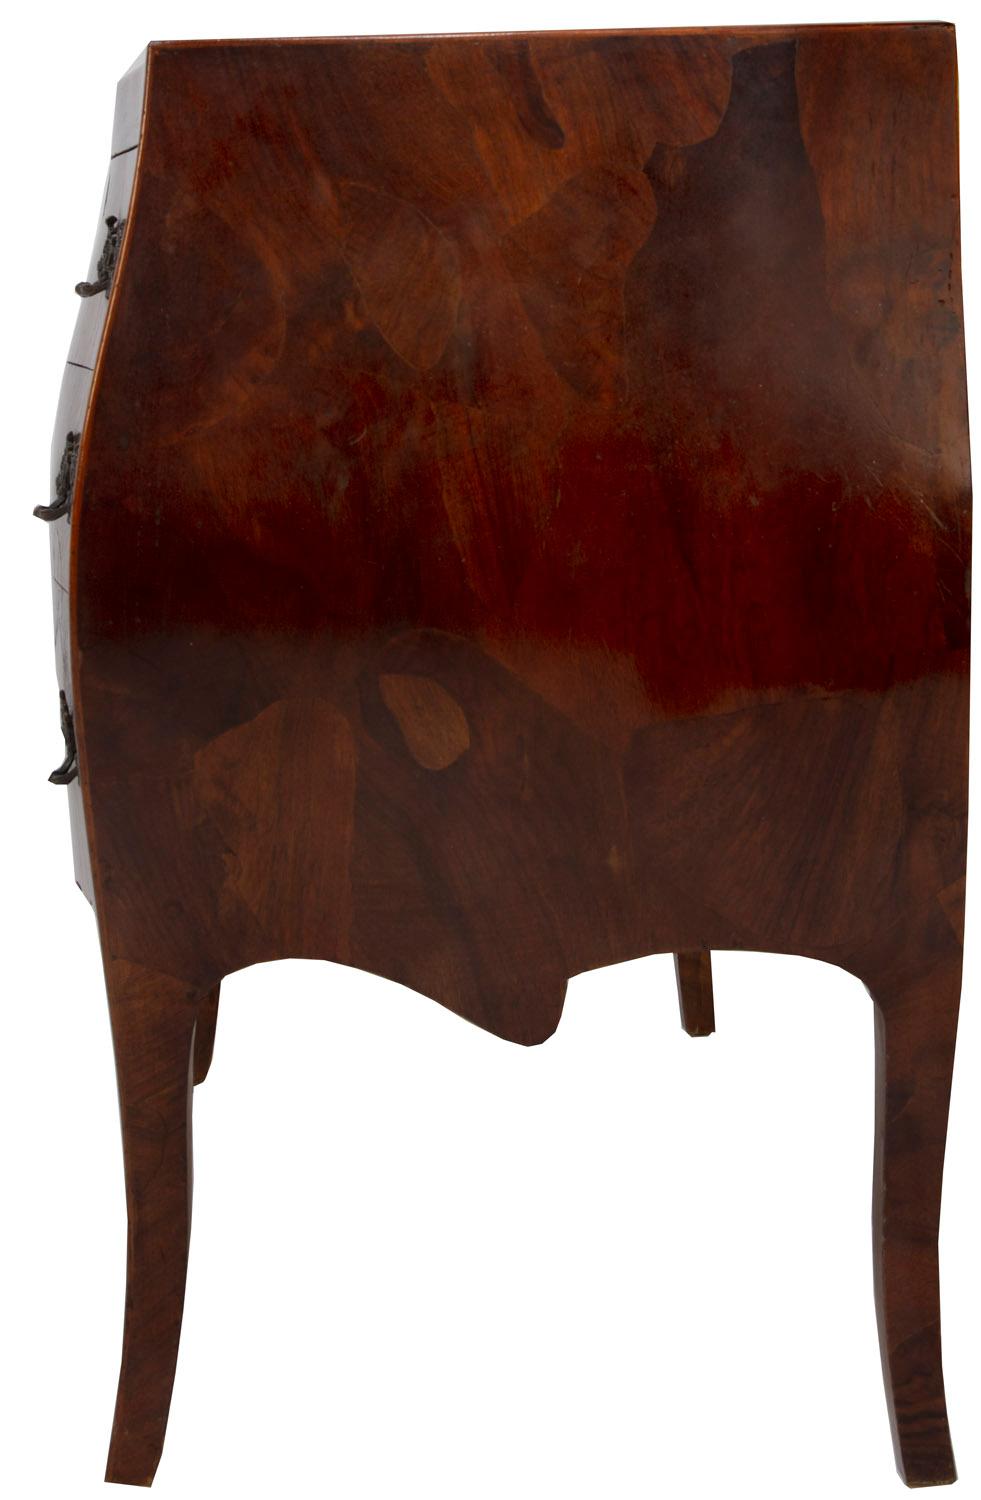 20th Century Beautiful Fruitwoods Italian Bombay Side Table For Sale